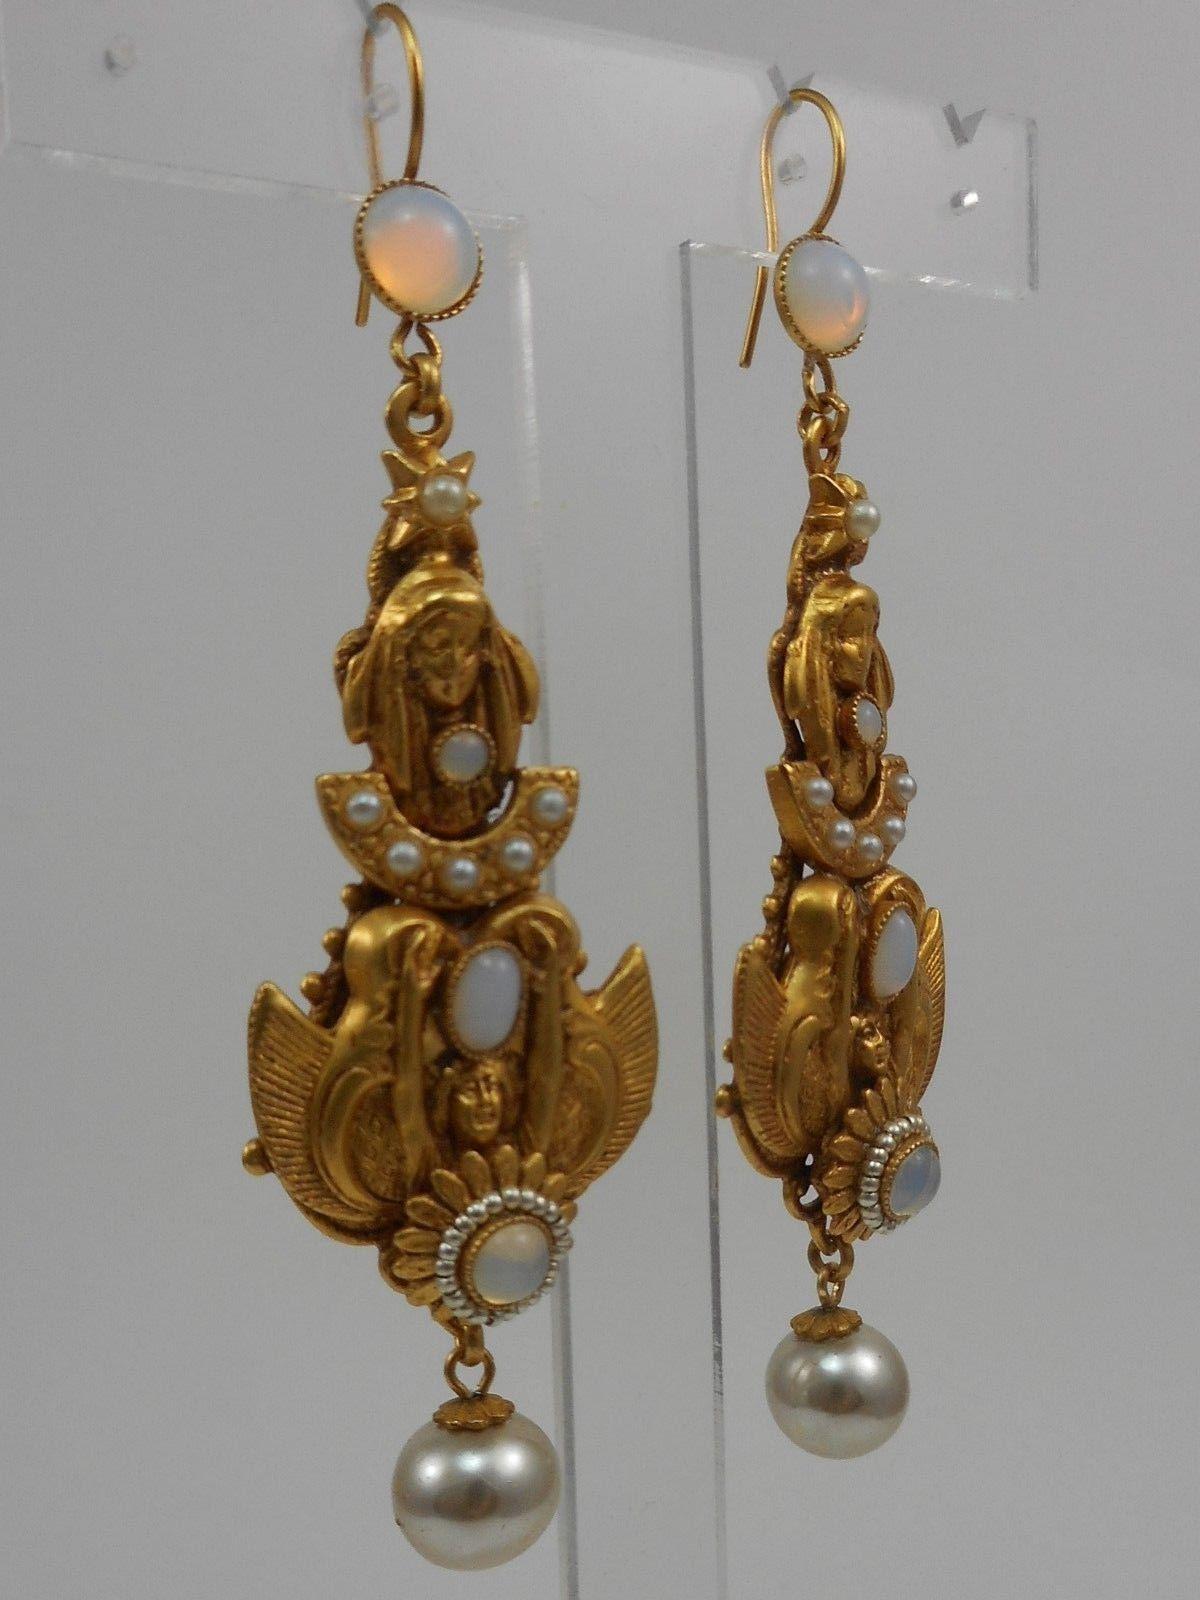 Askew London Winged Goddesses and Maidens, enhanced with Flowers, Pearl Beads and Glass Cabochon stones. Earrings Have Round Pearl Bead Drops and Hook Earring Fittings. Antiqued Filigree Gilt Brass; Earrings measure approx. 3.75'' X 1.00'' Signed: